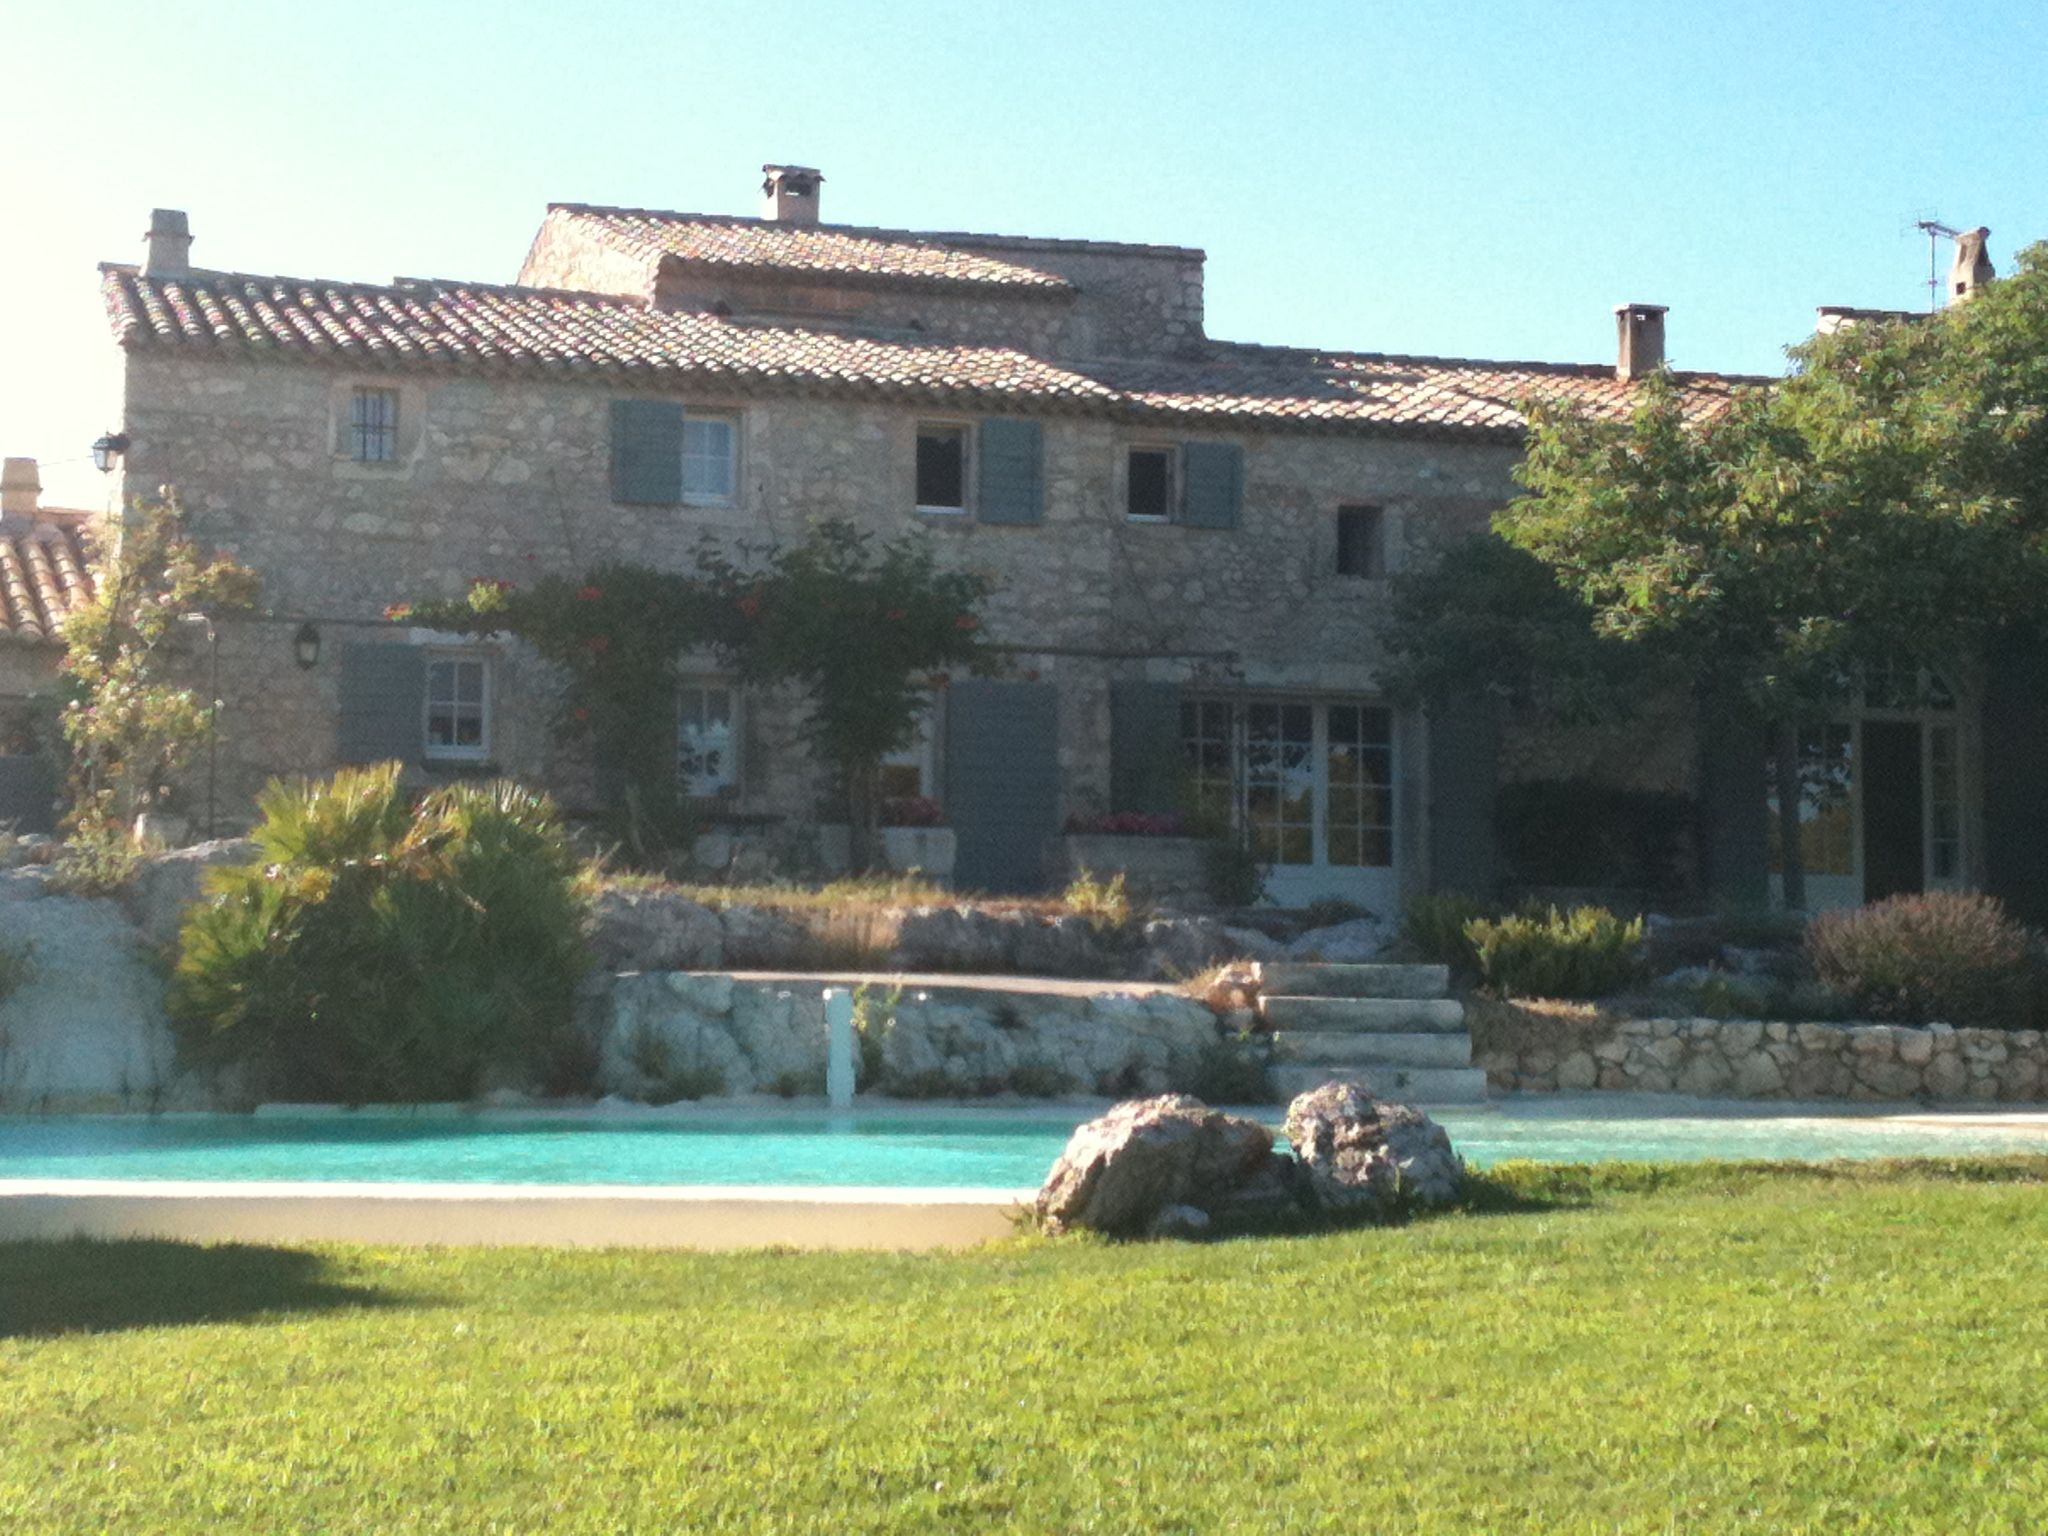 Mas de la Rose, Eygalieres, b&b, chambres d'hotes, provence, alpilles, boutique hotels blog, boutique hotels reviews, from the poolside blog, family holidays